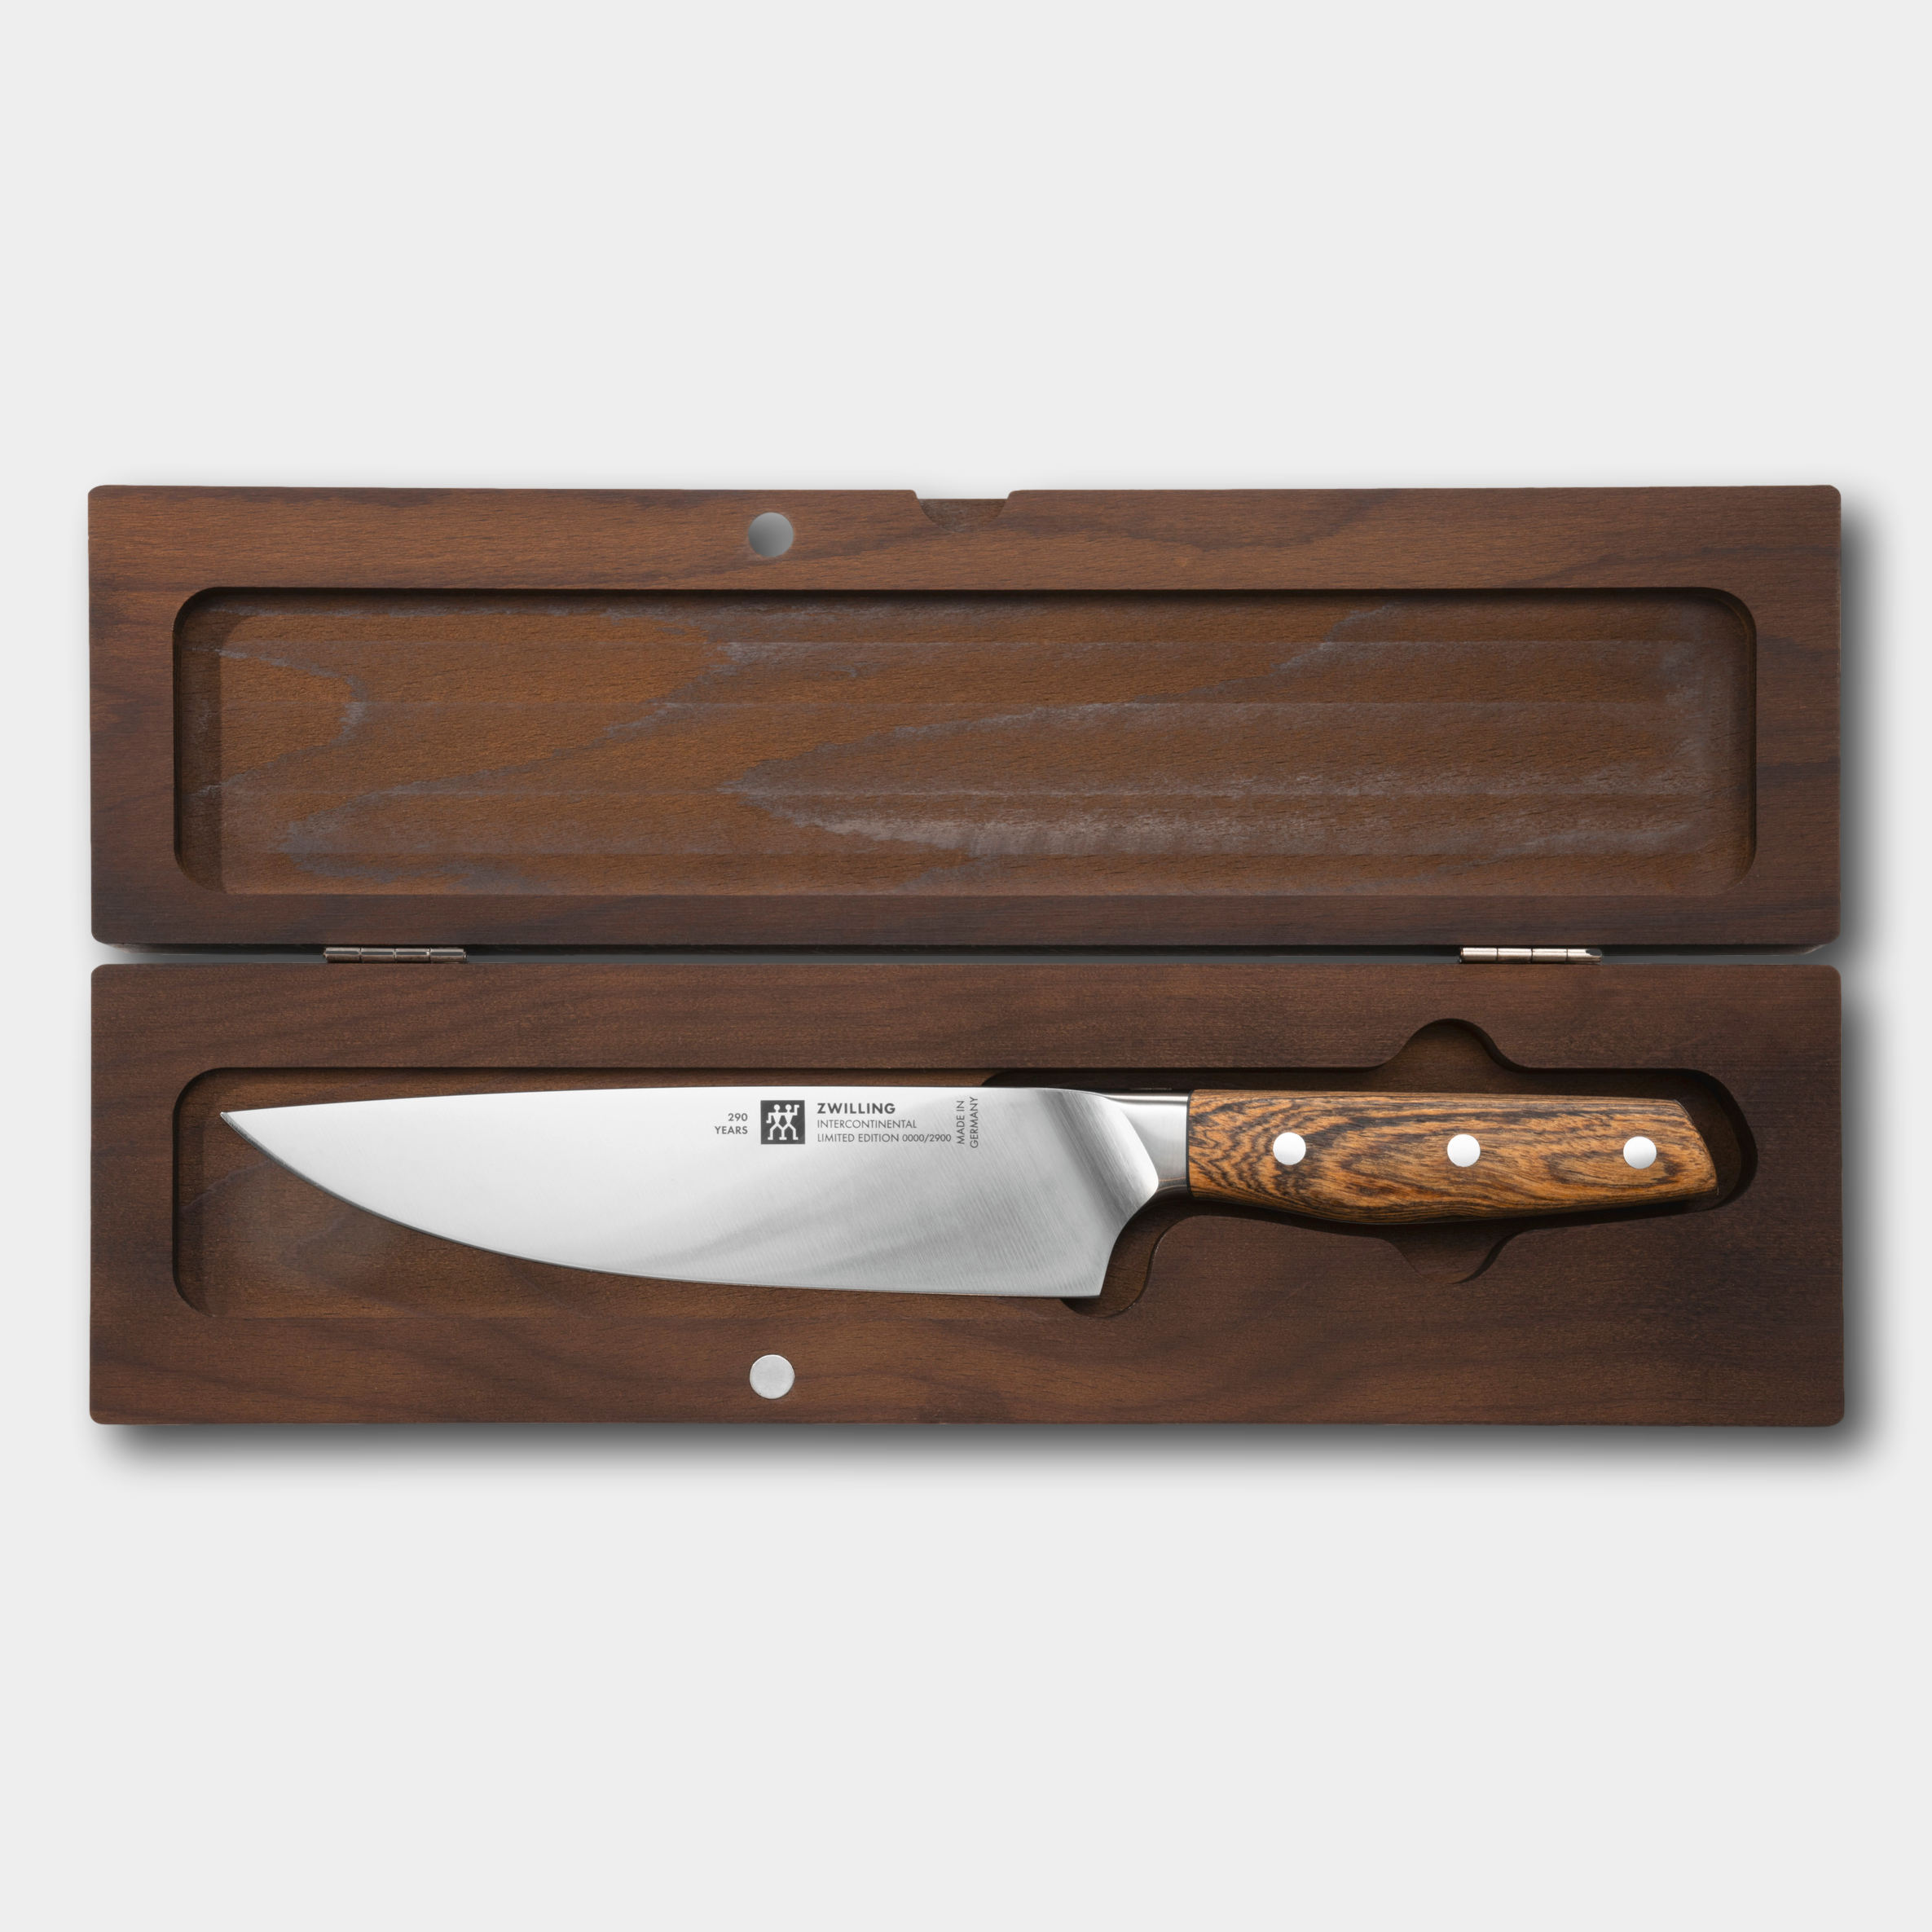 Zwilling Intercontinental 290 Years Limited Edition Chef Knife 20cm